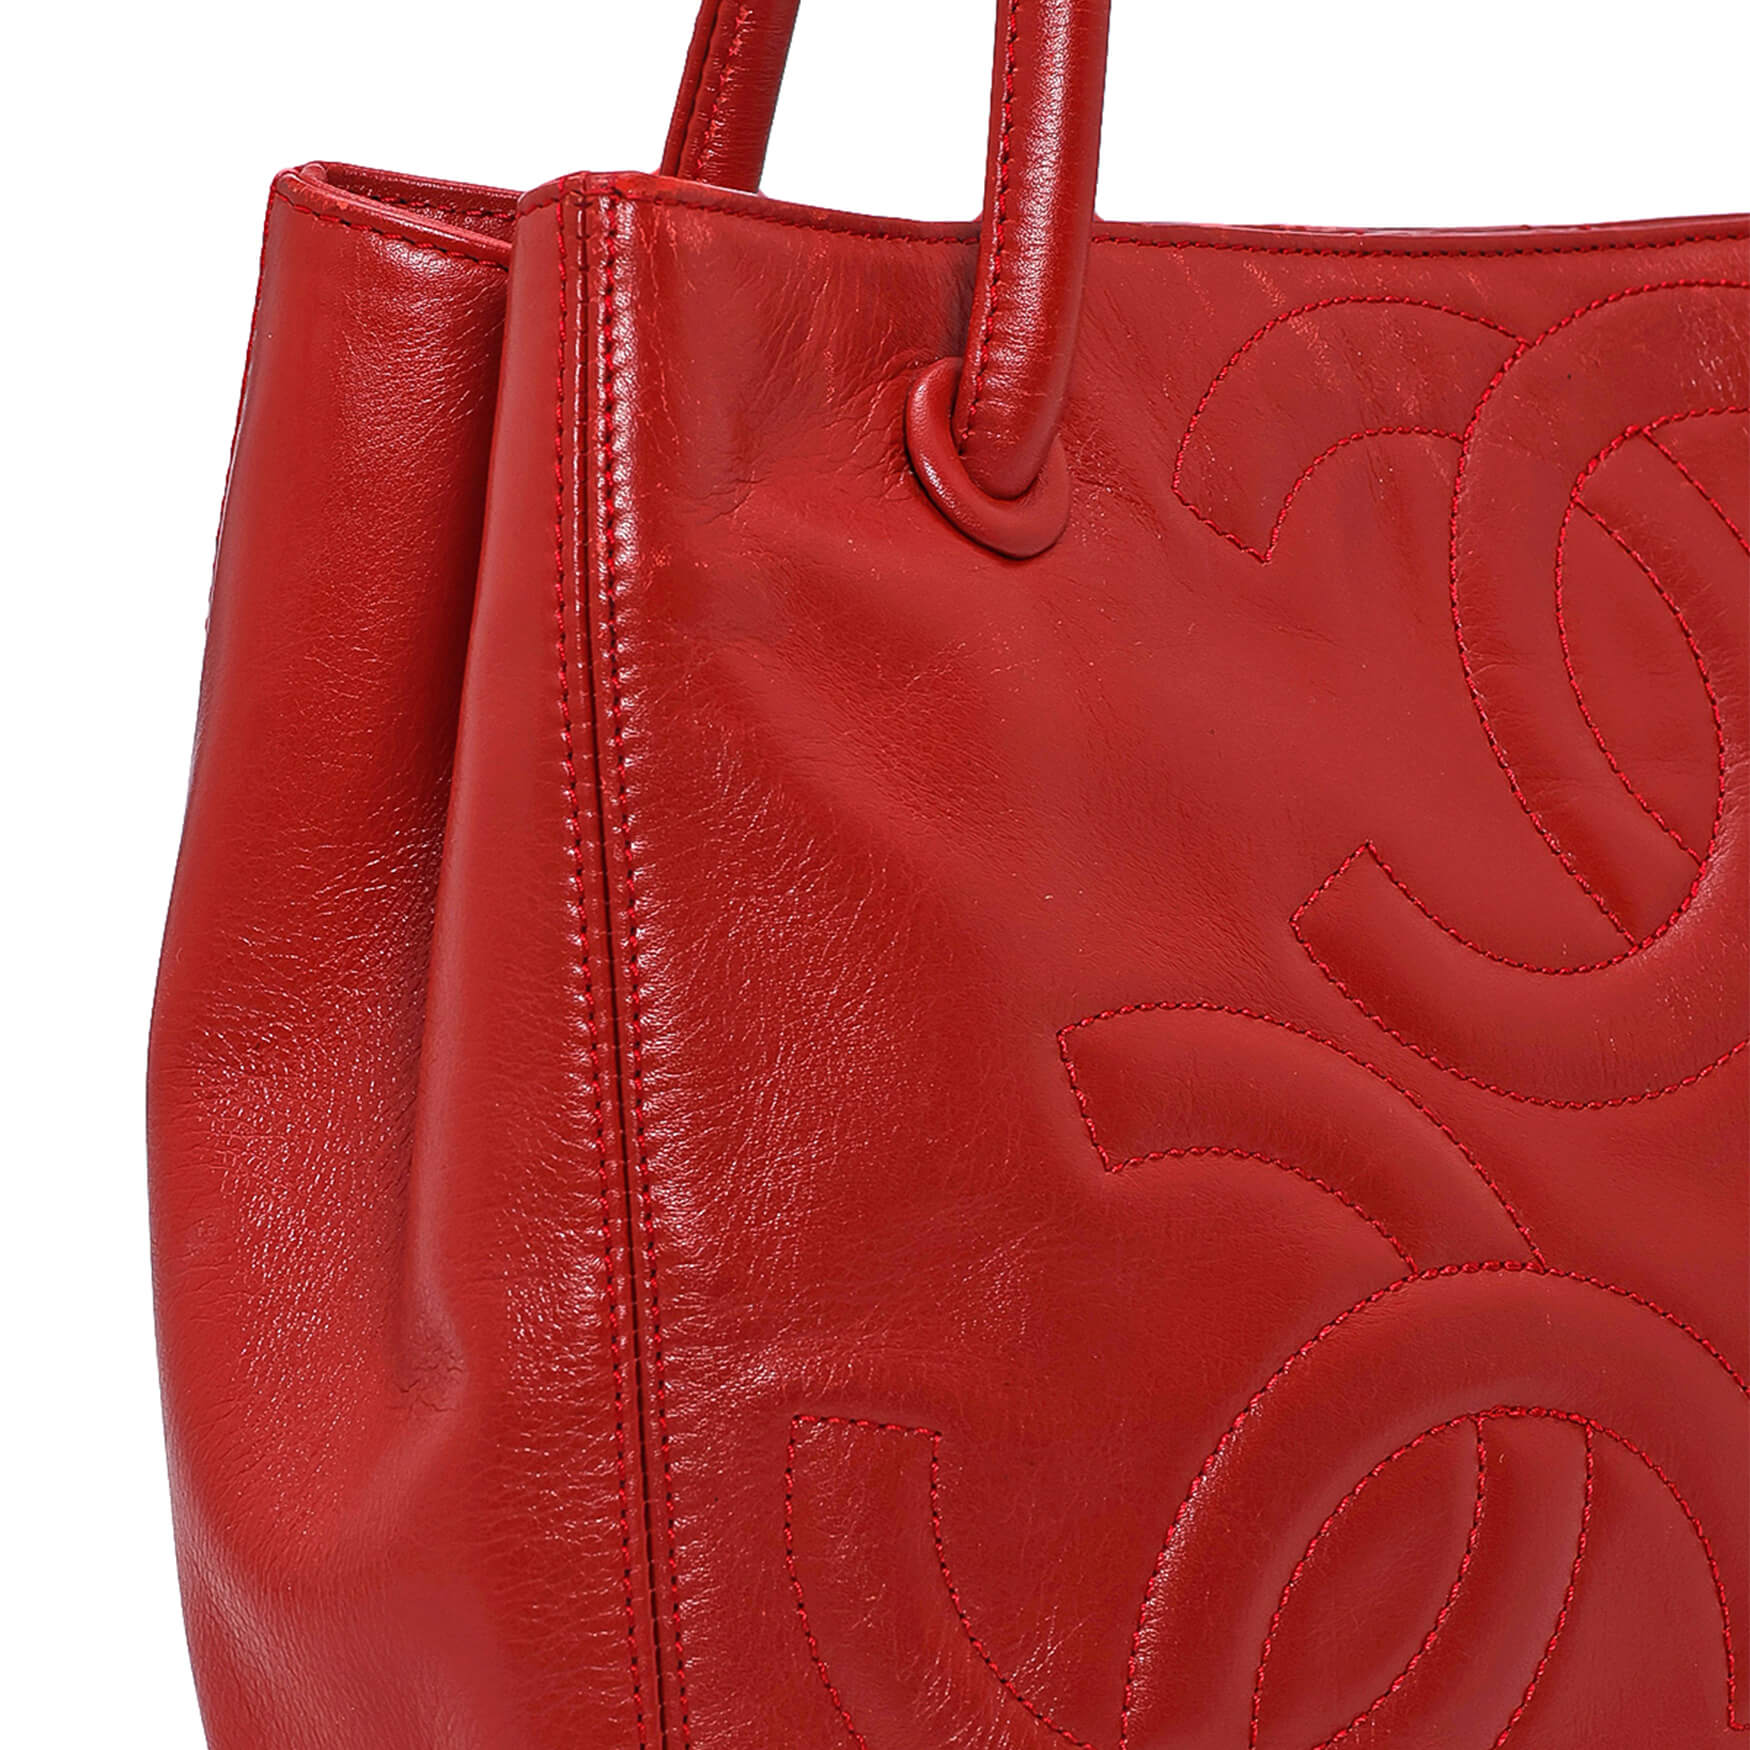 Chanel - Red Lambskin Leather CC Medallion Bag